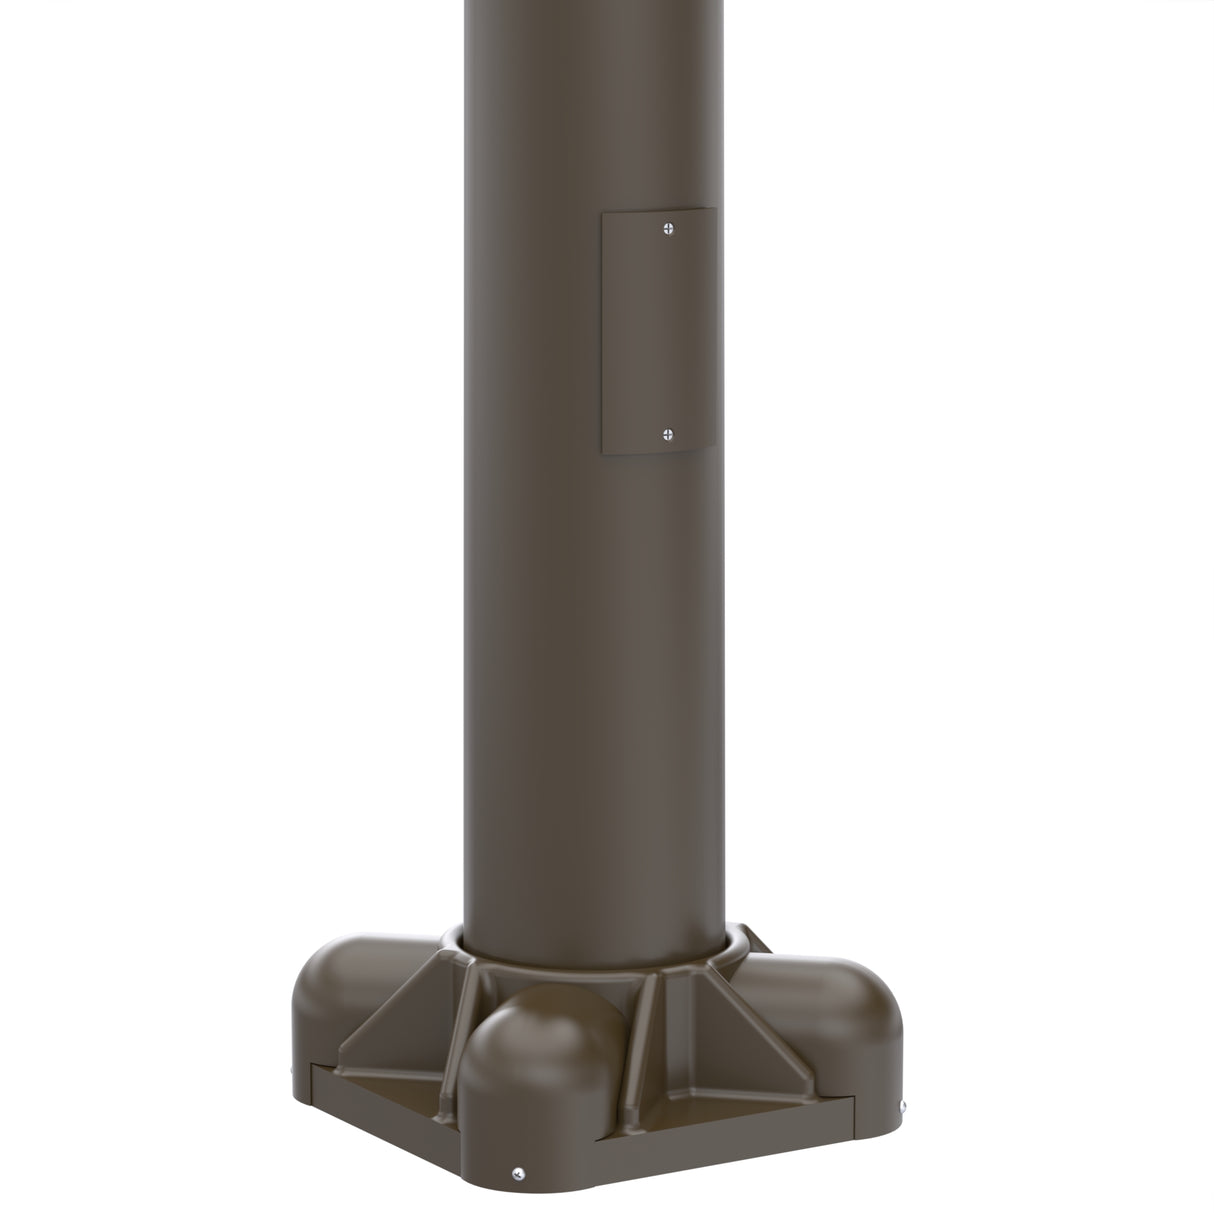 28' Tall x 7.0" Base OD x 4.0" Top OD x 0.156" Thick, Round Tapered Aluminum, Anchor Base Light Pole